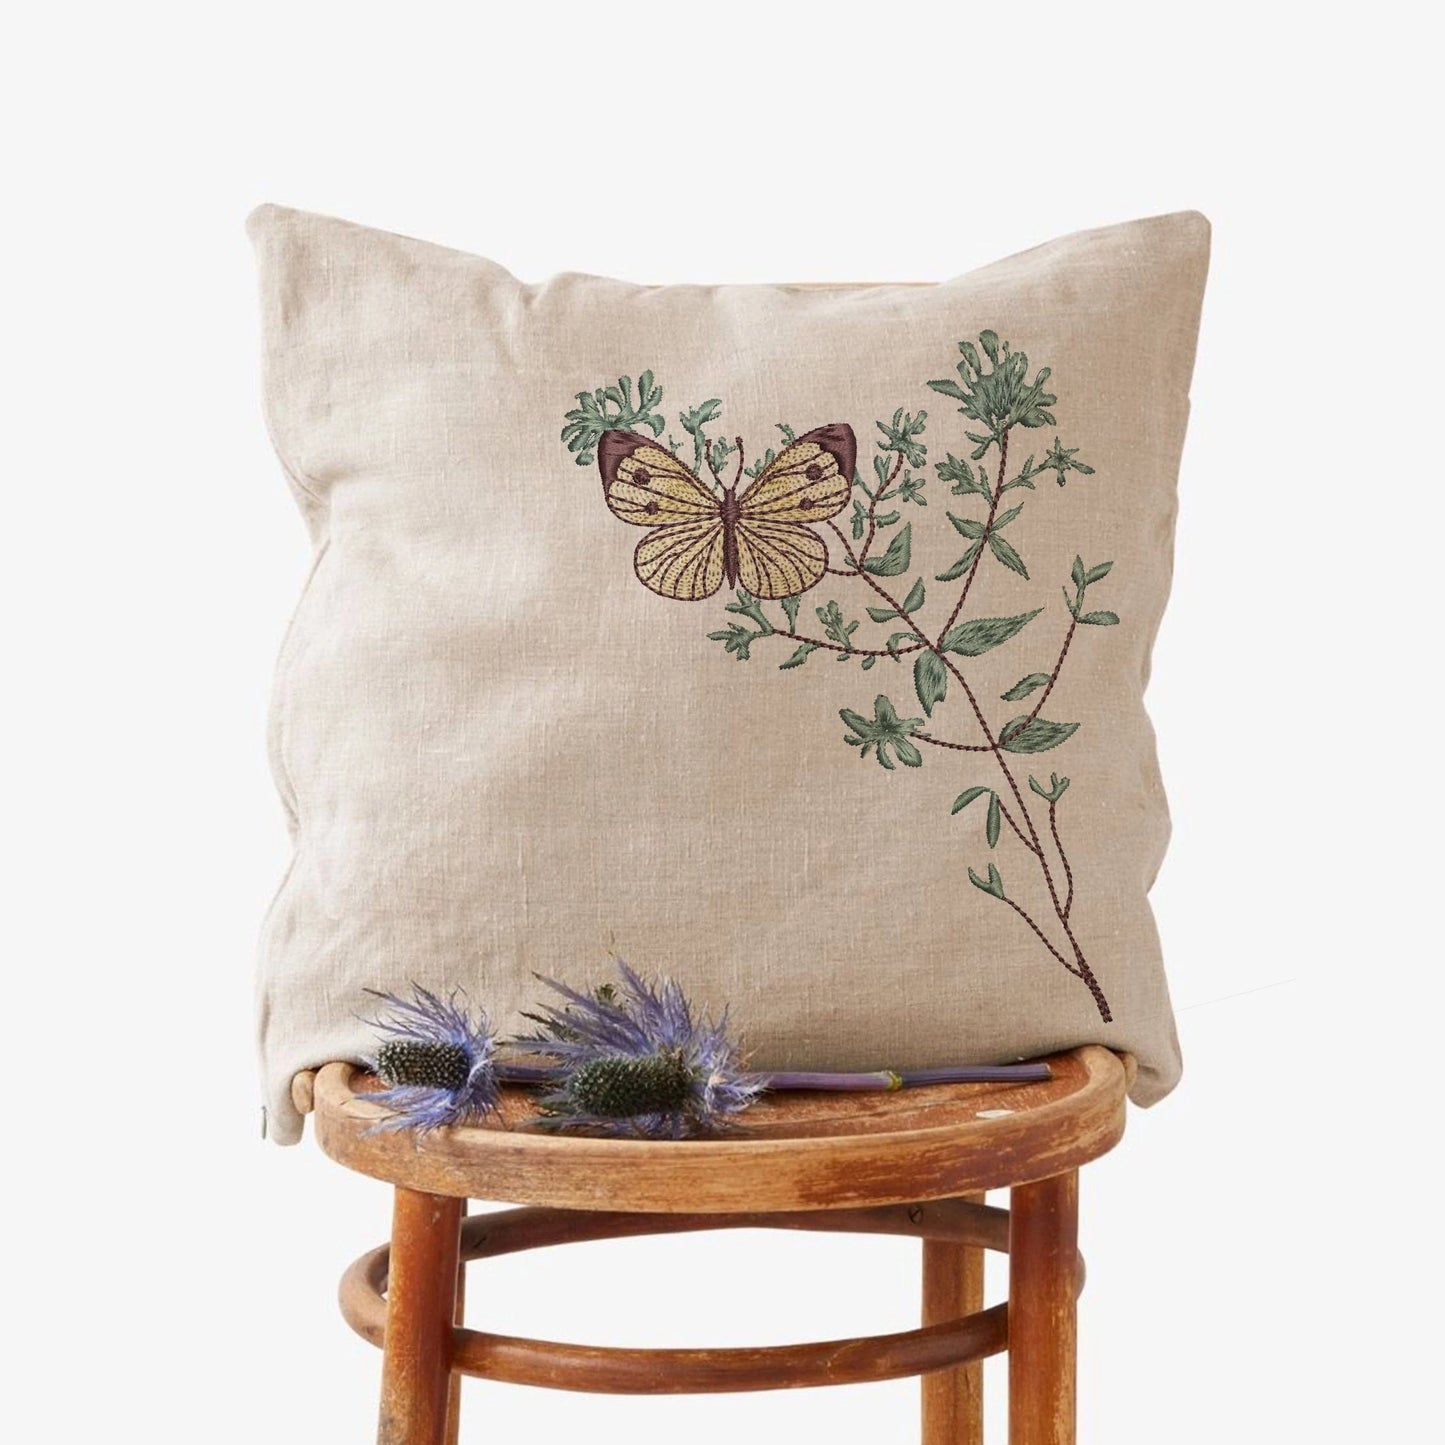 Vintage style Flower Butterfly Machine Embroidery Design on pillow